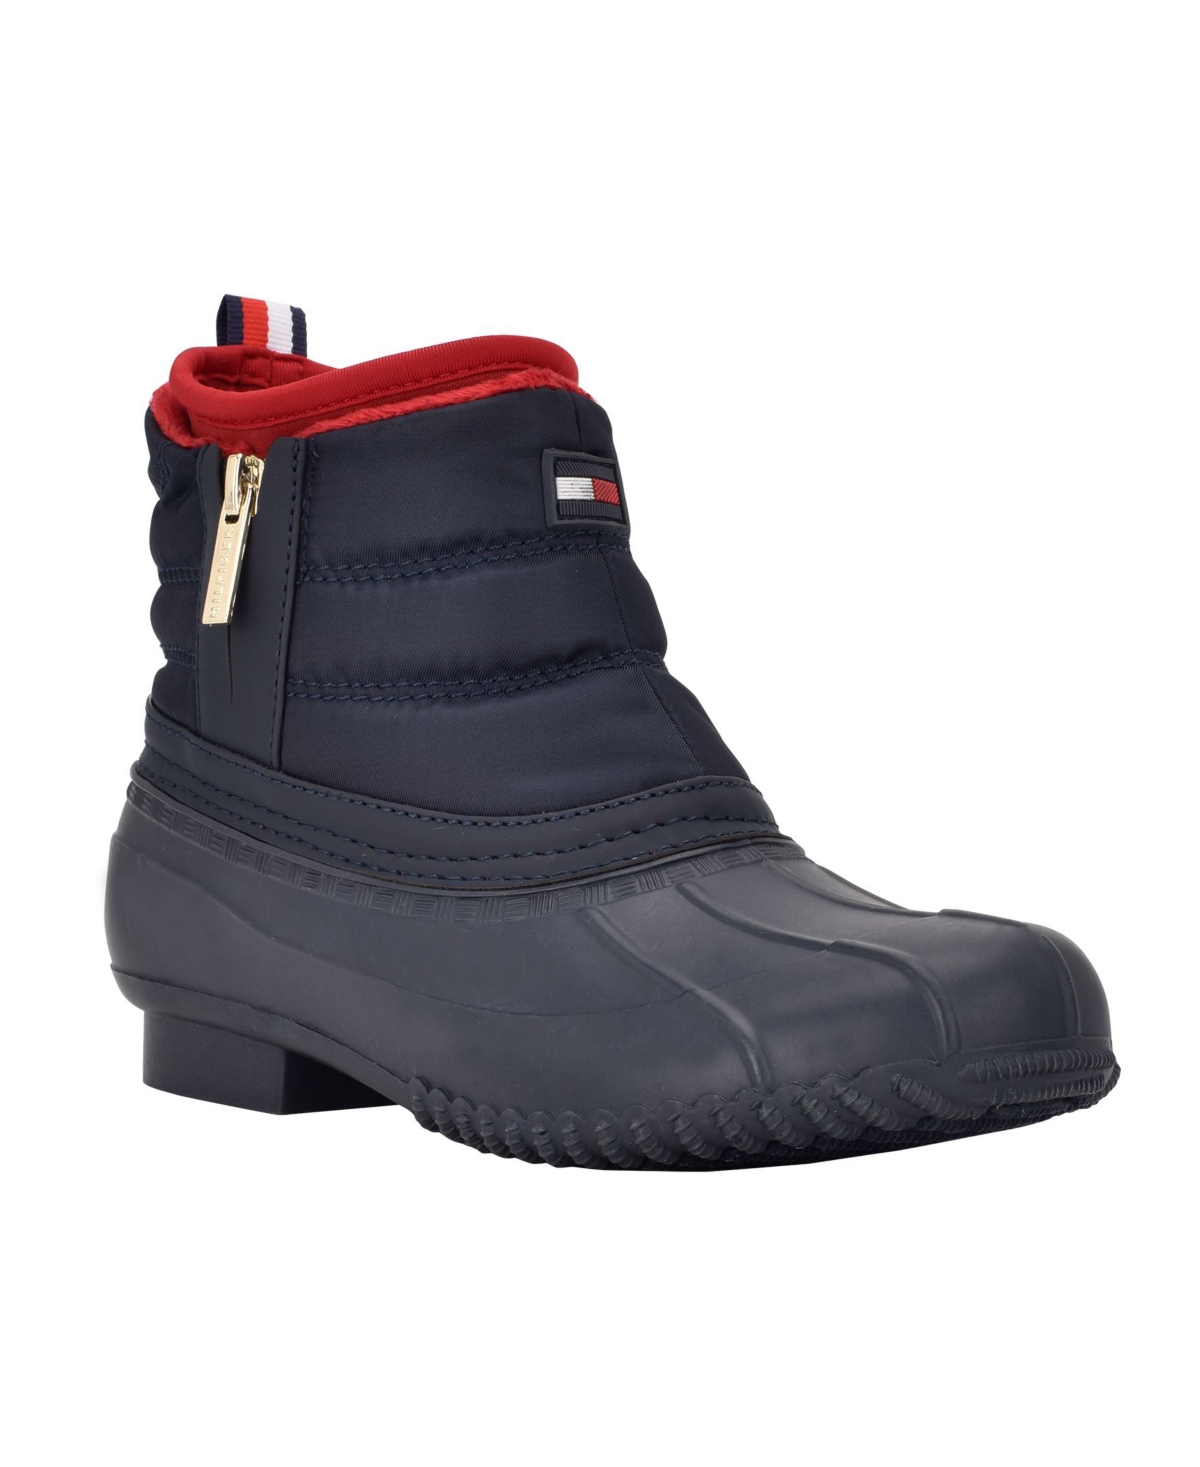 UPC 195972717978 product image for Tommy Hilfiger Women's Roana Zip Up Duck Booties Women's Shoes | upcitemdb.com